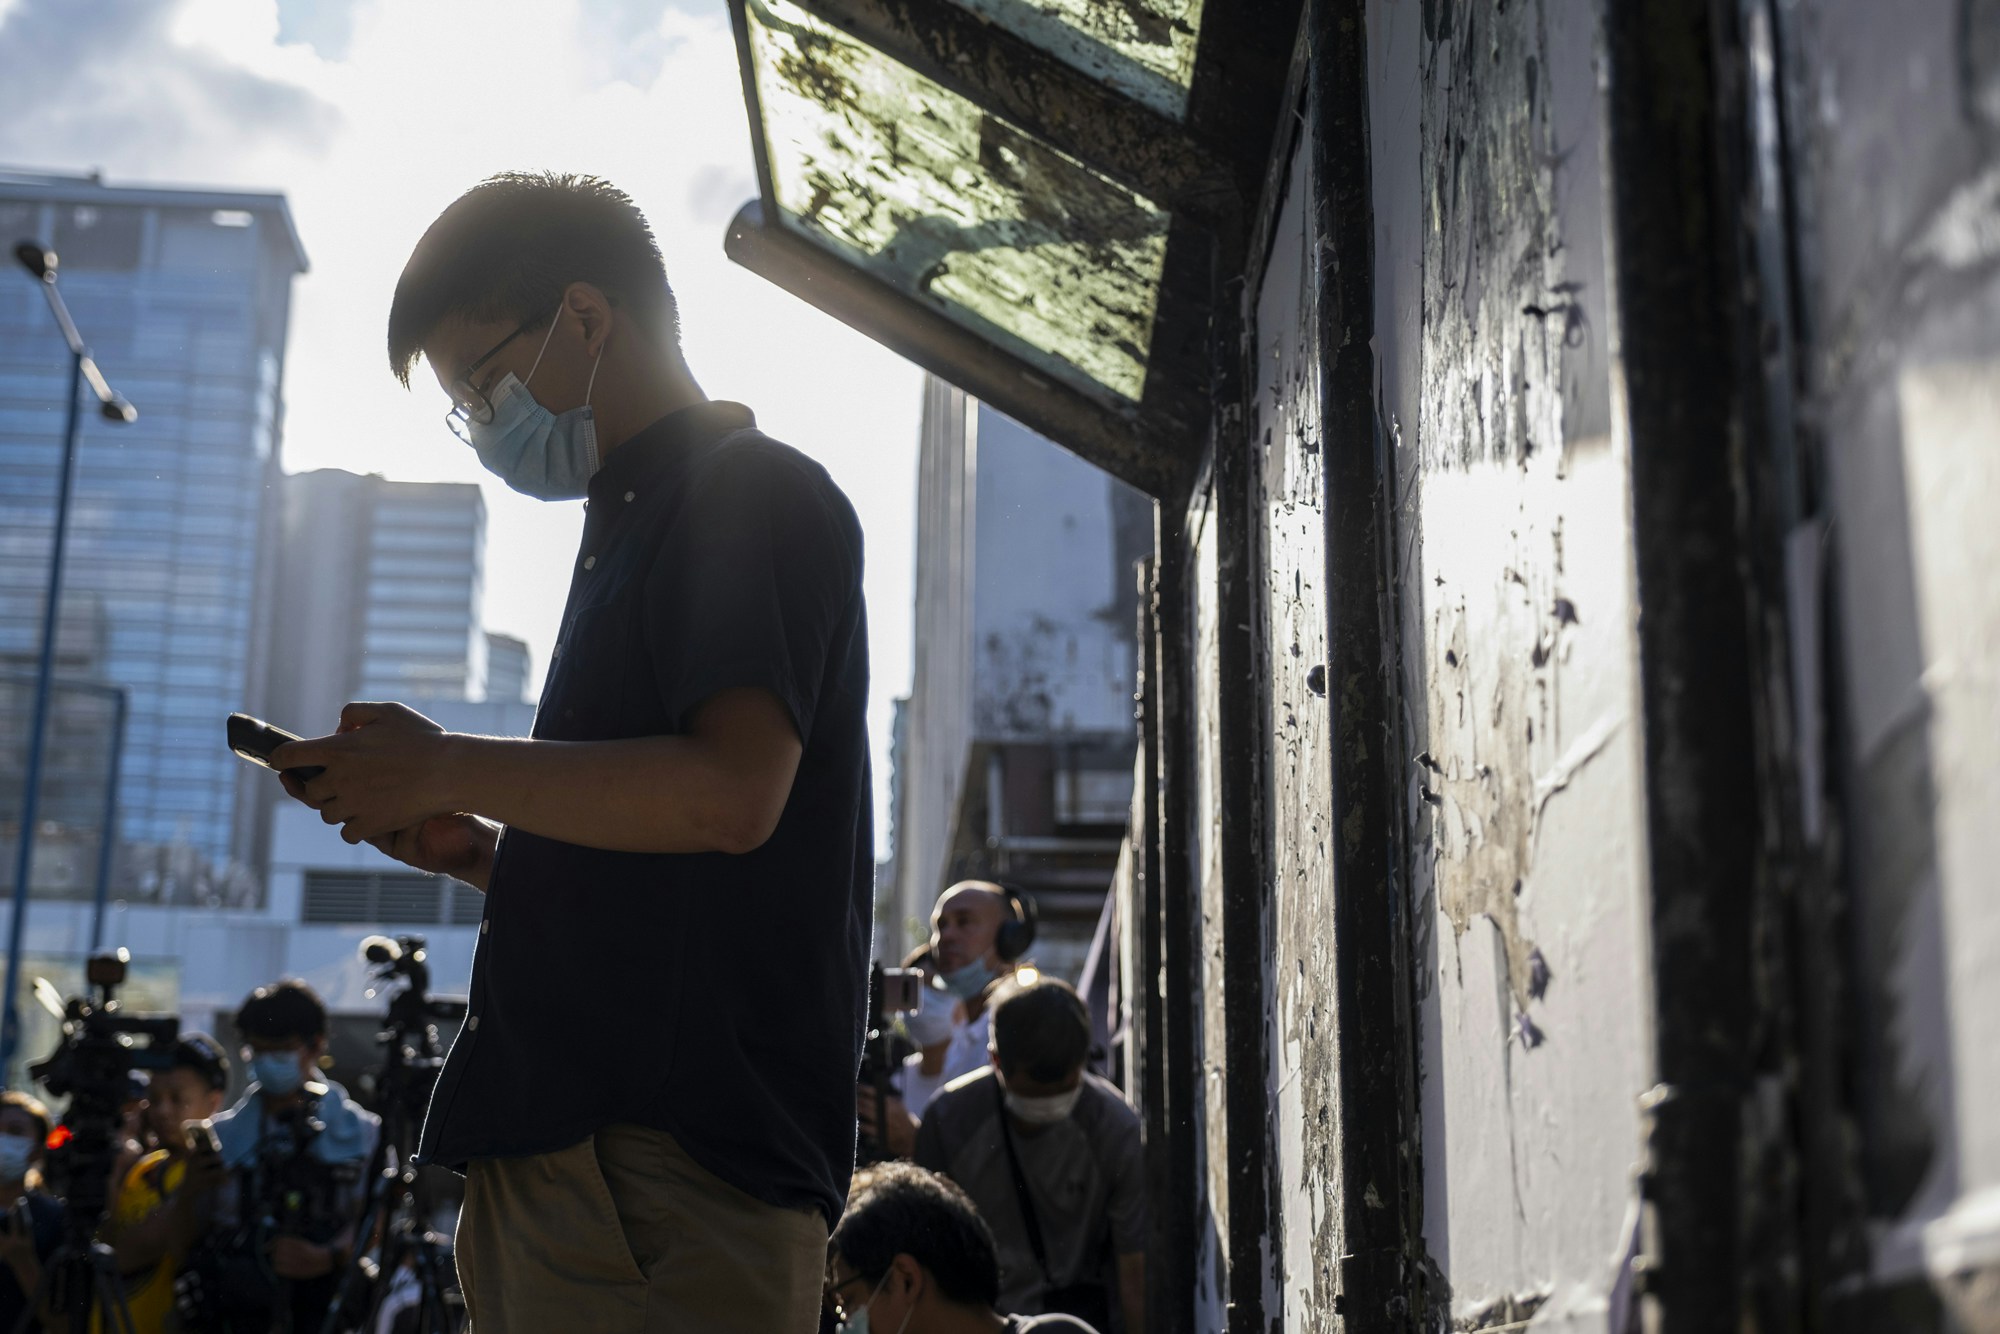 Joshua Wong, secretary-general of the Demosisto political party, wears a protective face mask as he uses his smart phone during a news conference to announce his bid to enter into the unofficial pro-democratic camp primary election for the Legislative Council in Hong Kong, China, on Friday, June 19, 2020. To overcome fractures between the moderates and more radical localists, legal scholar Benny Tai is attempting to organize an unofficial primary on July 11 and July 12 to select favored candidates in each district. Photographer: Chan Long Hei/Bloomberg via Getty Images